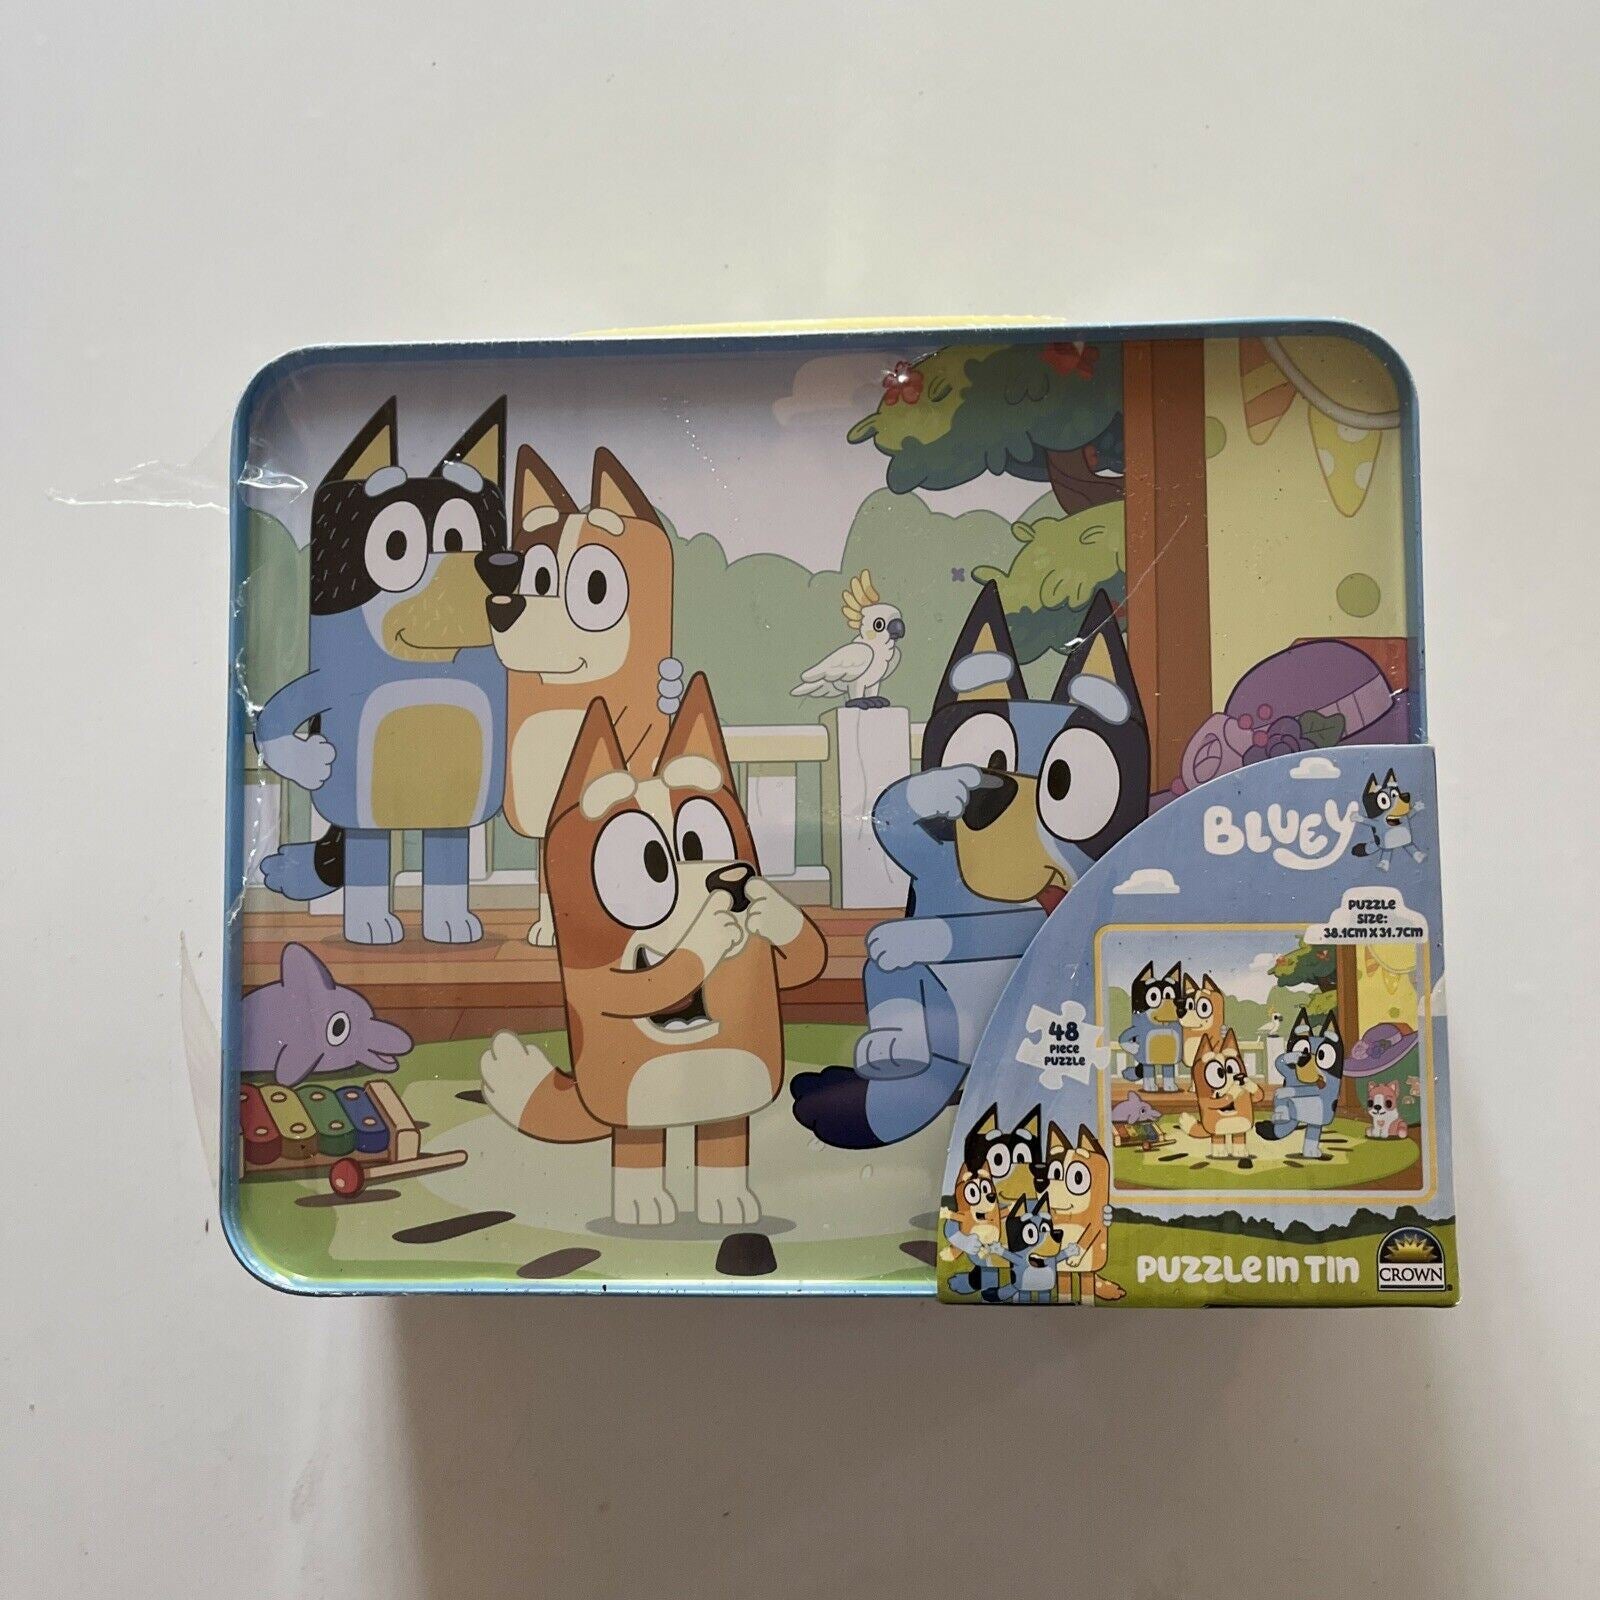 Bluey Lunchbox Tin With Puzzle and Toy Figure Bluey Bluey Toys Bluey Dog  Lunchbox Tins Puzzles Toys Gift 